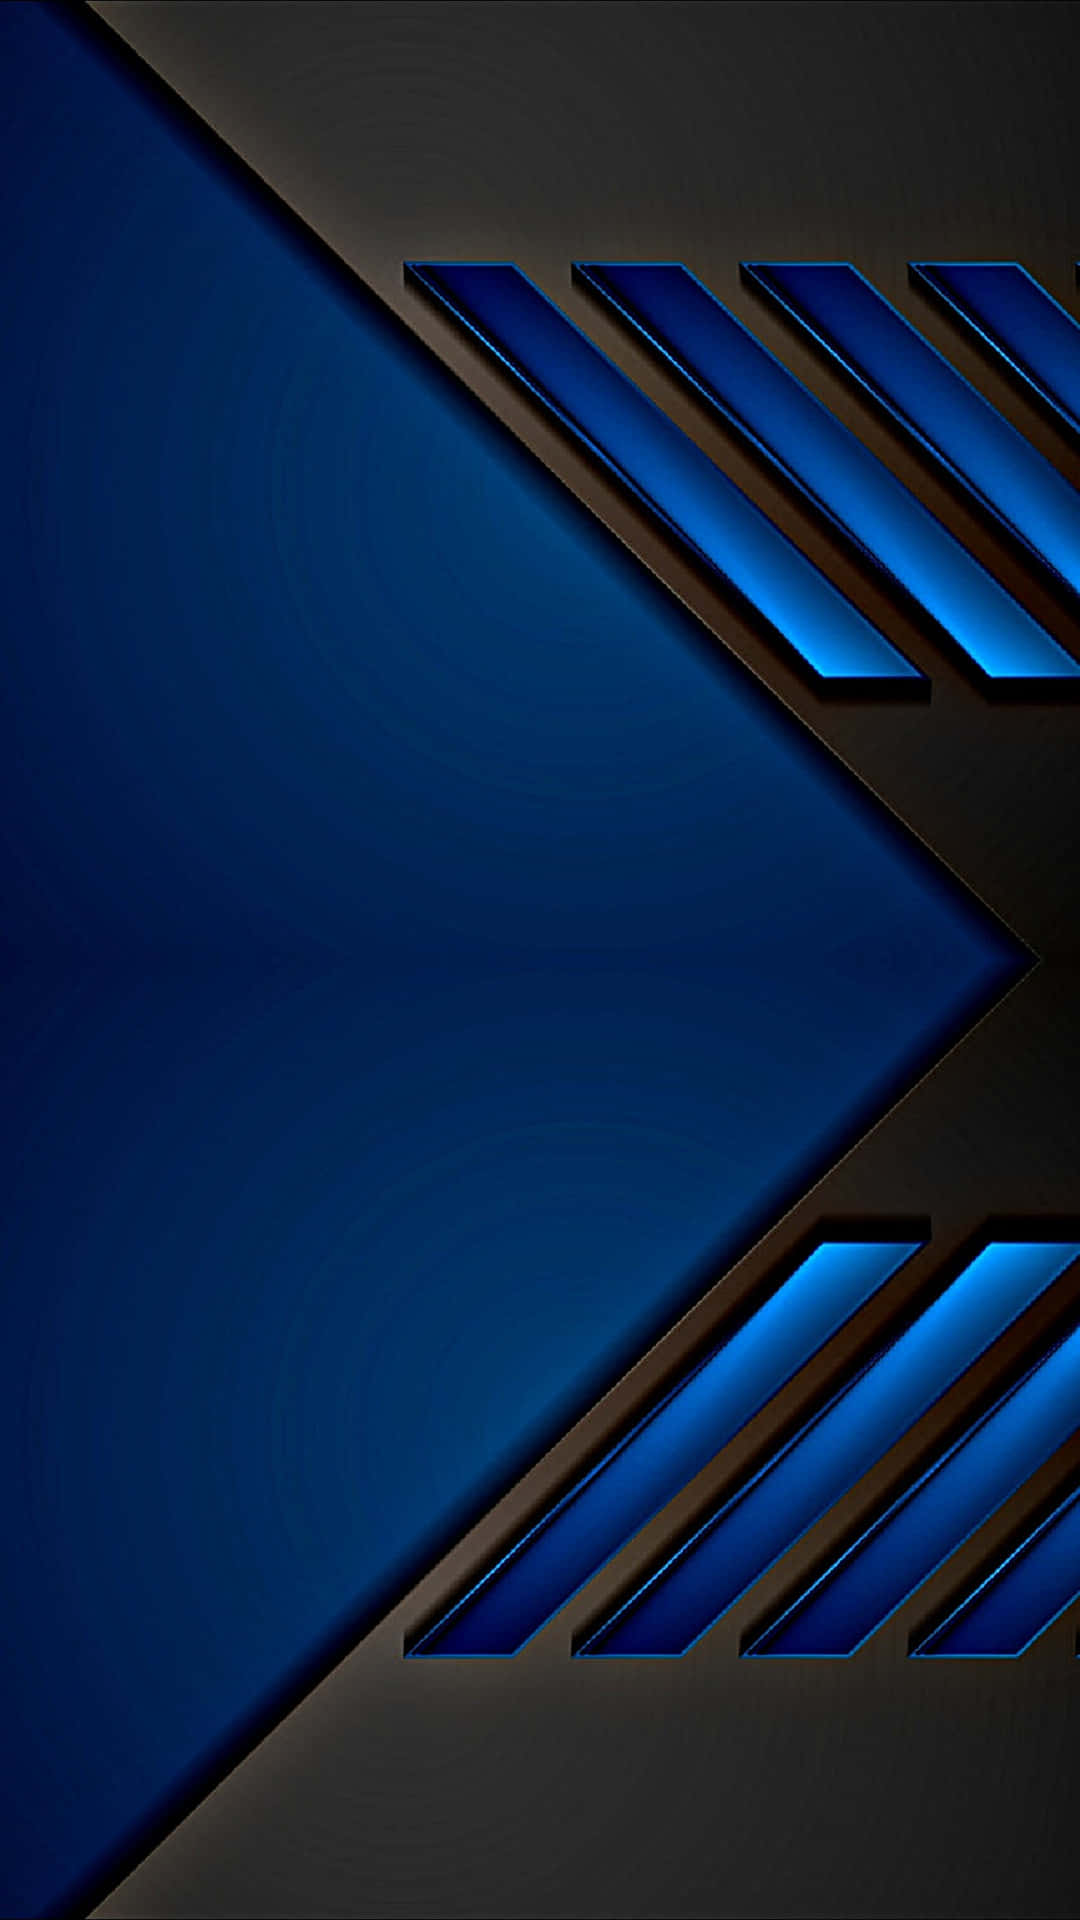 blue and black arrows on a black background